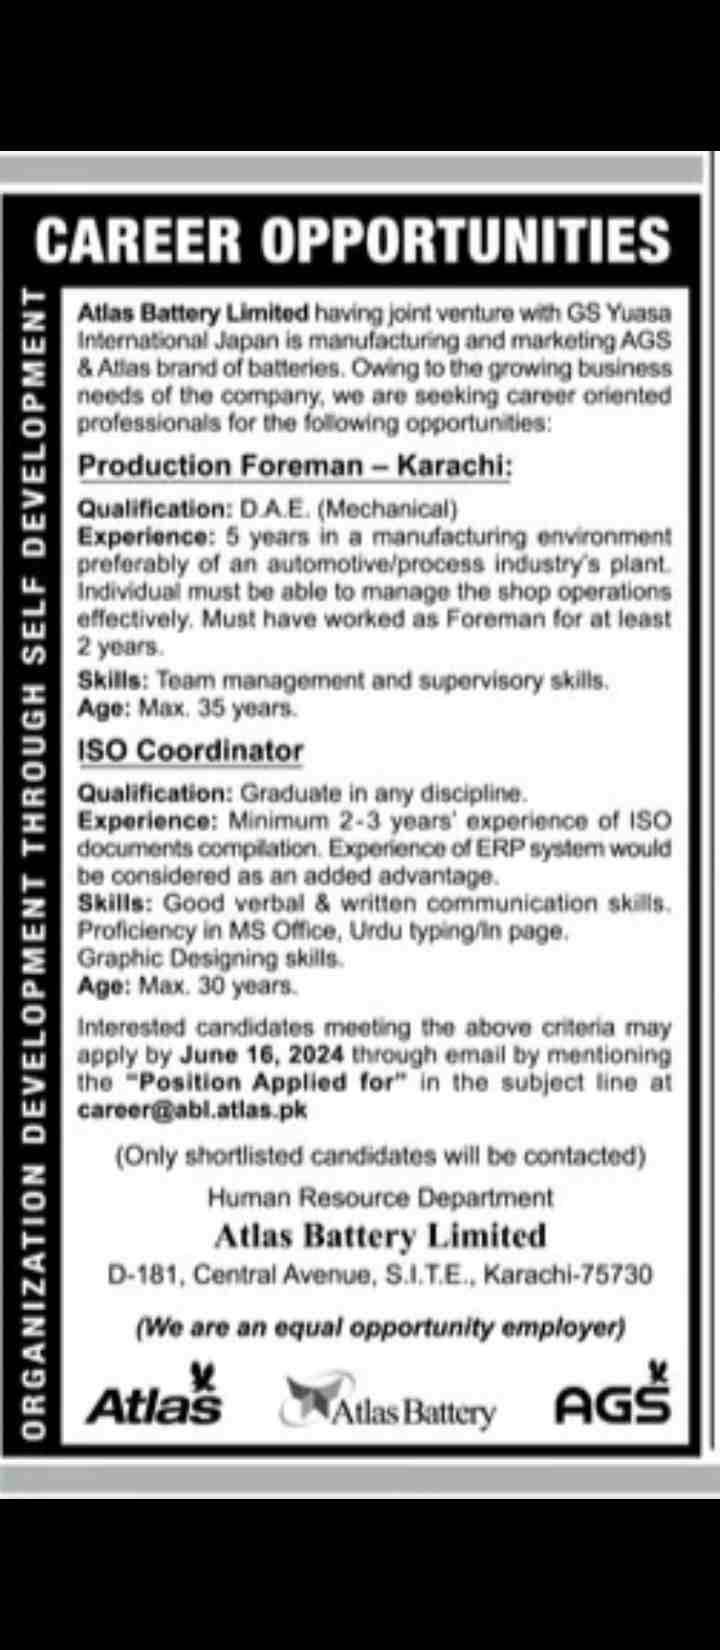 Atlas Battery Limited job openings announcement, featuring positions in production and ISO coordination